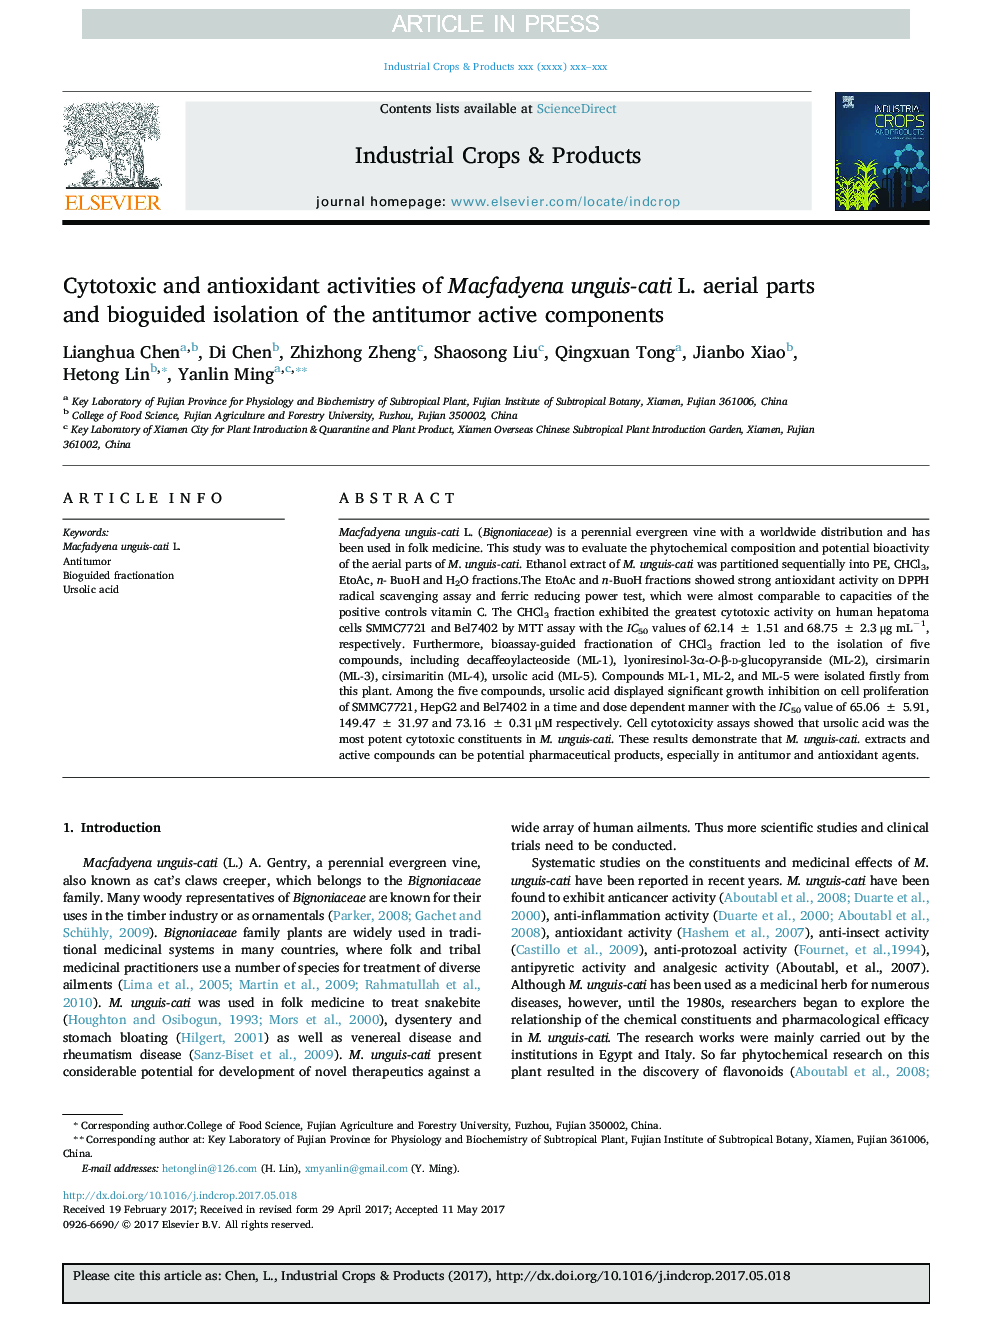 Cytotoxic and antioxidant activities of Macfadyena unguis-cati L. aerial parts and bioguided isolation of the antitumor active components